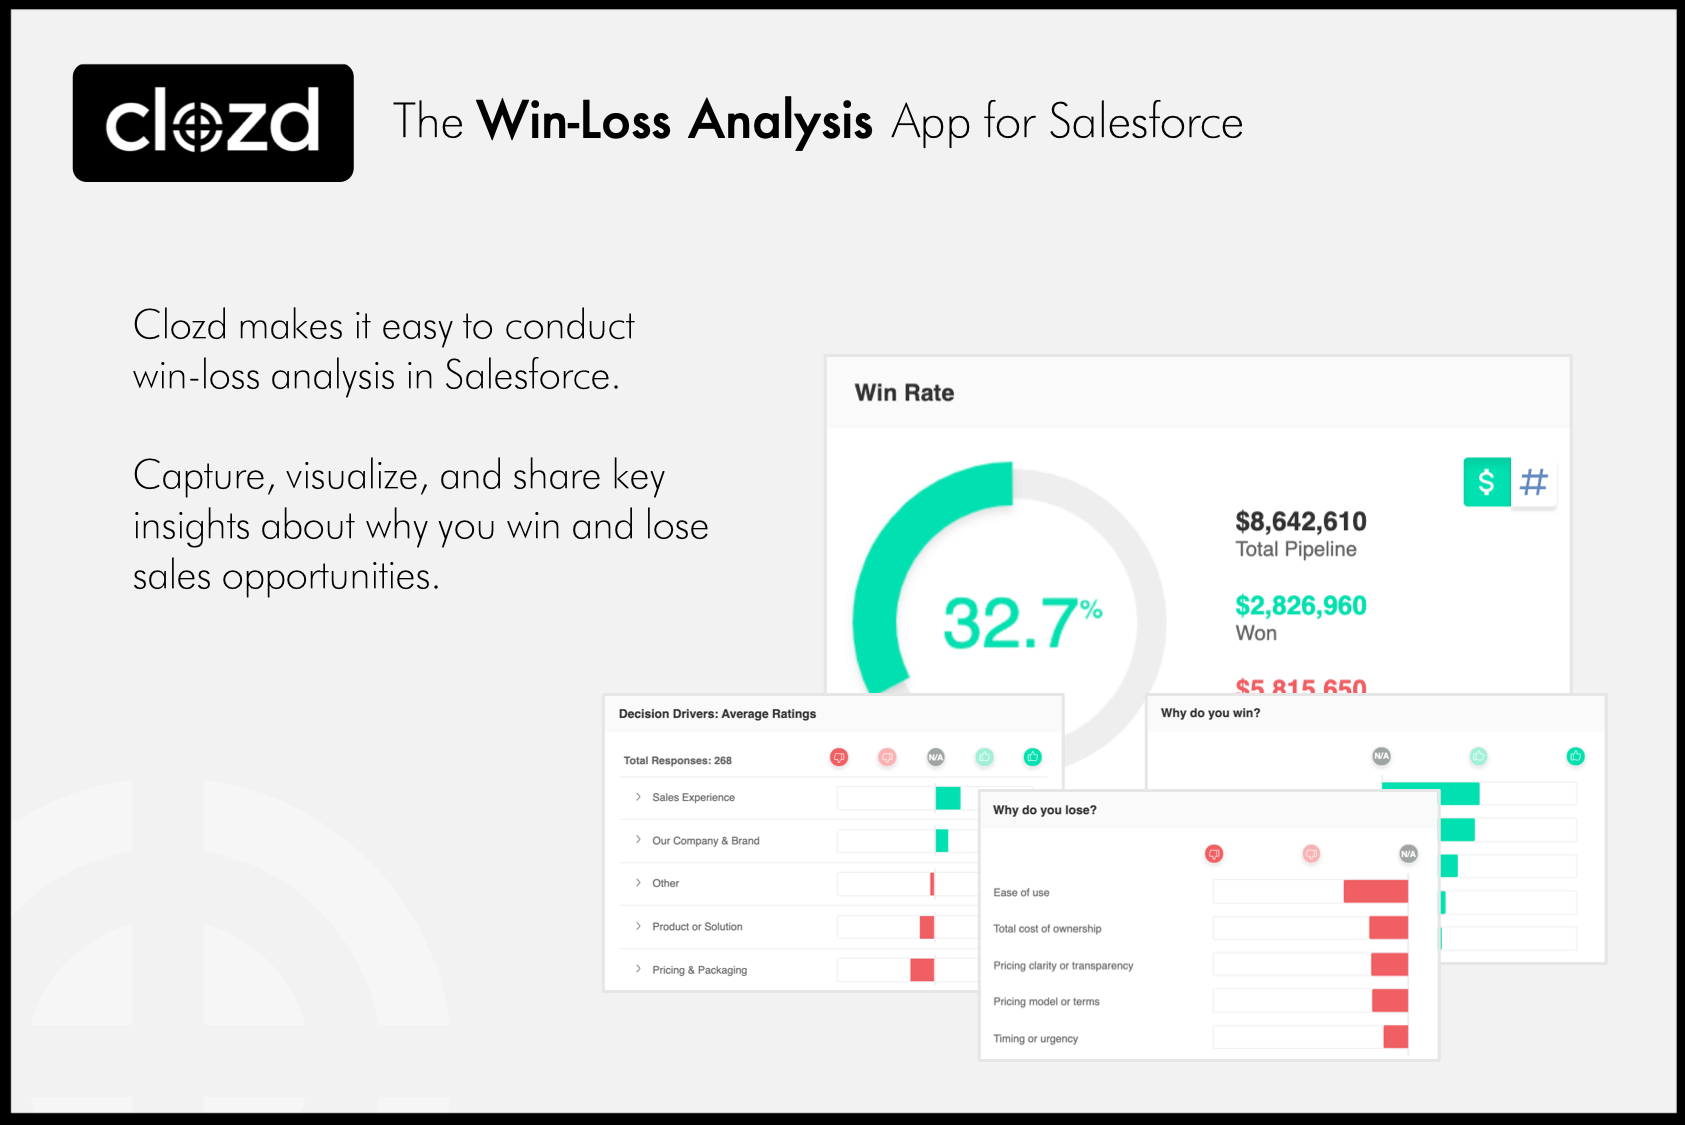 Clozd has built a Salesforce app for Win-Loss Analysis